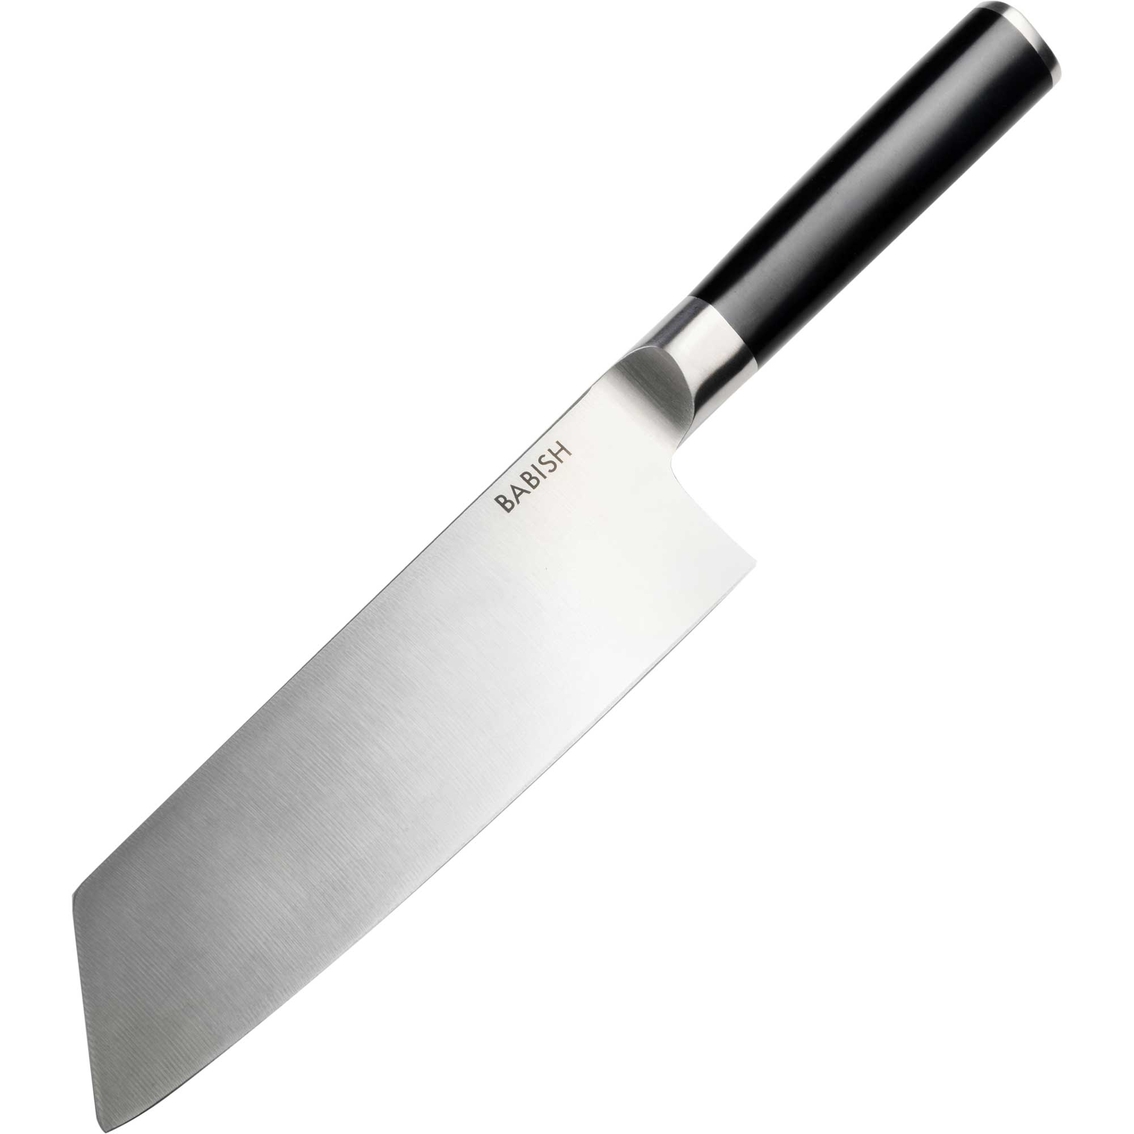 Babish Knives Are Excellent For Cooks of All Levels – Mace & Crown